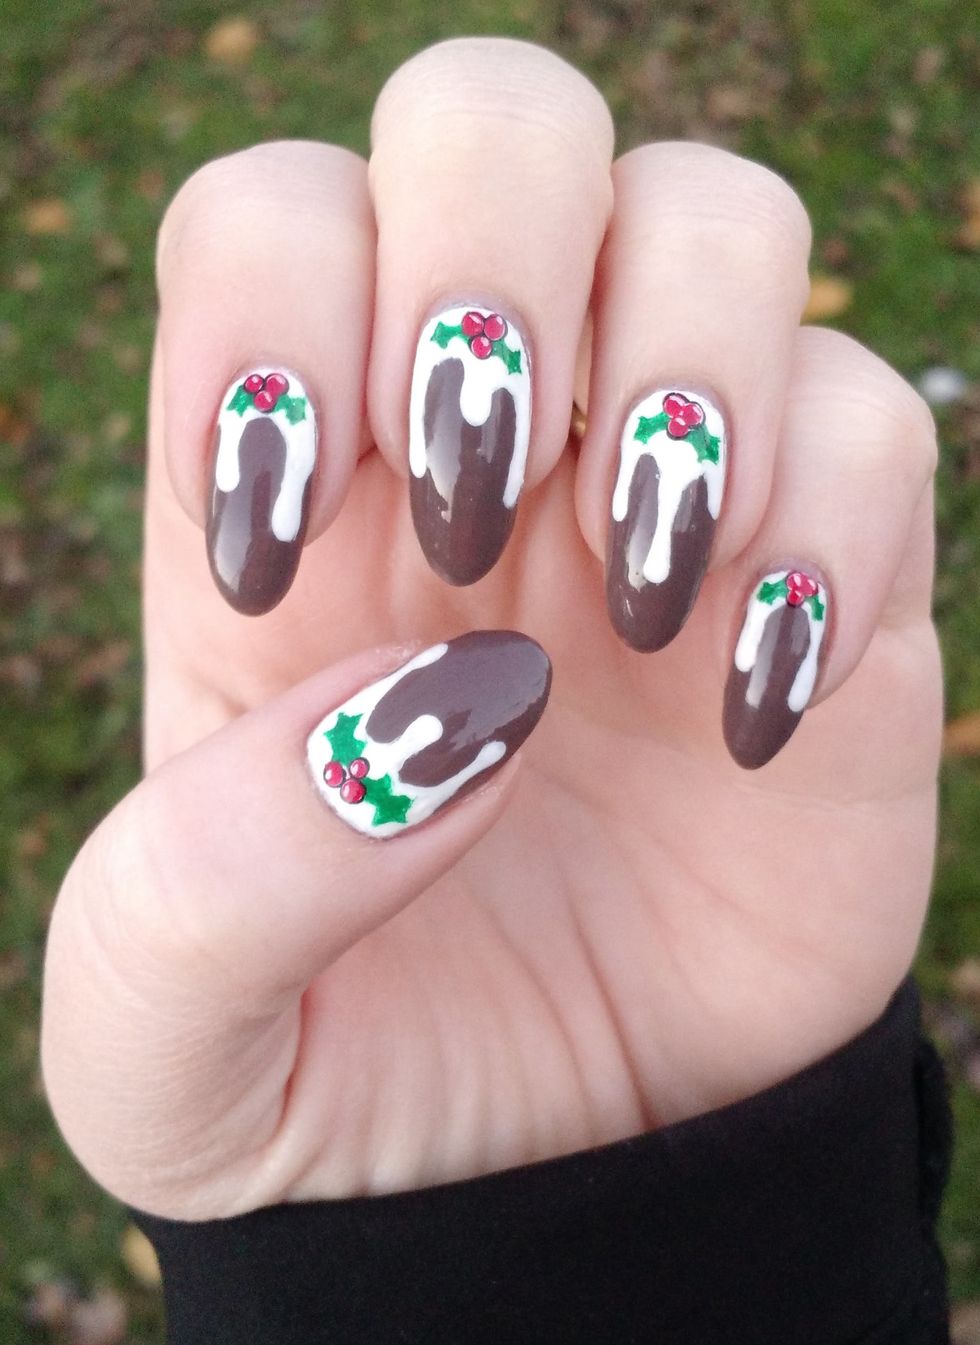 Upgrade Your Holiday Mani With Mistletoe Nail Art - Brit + Co